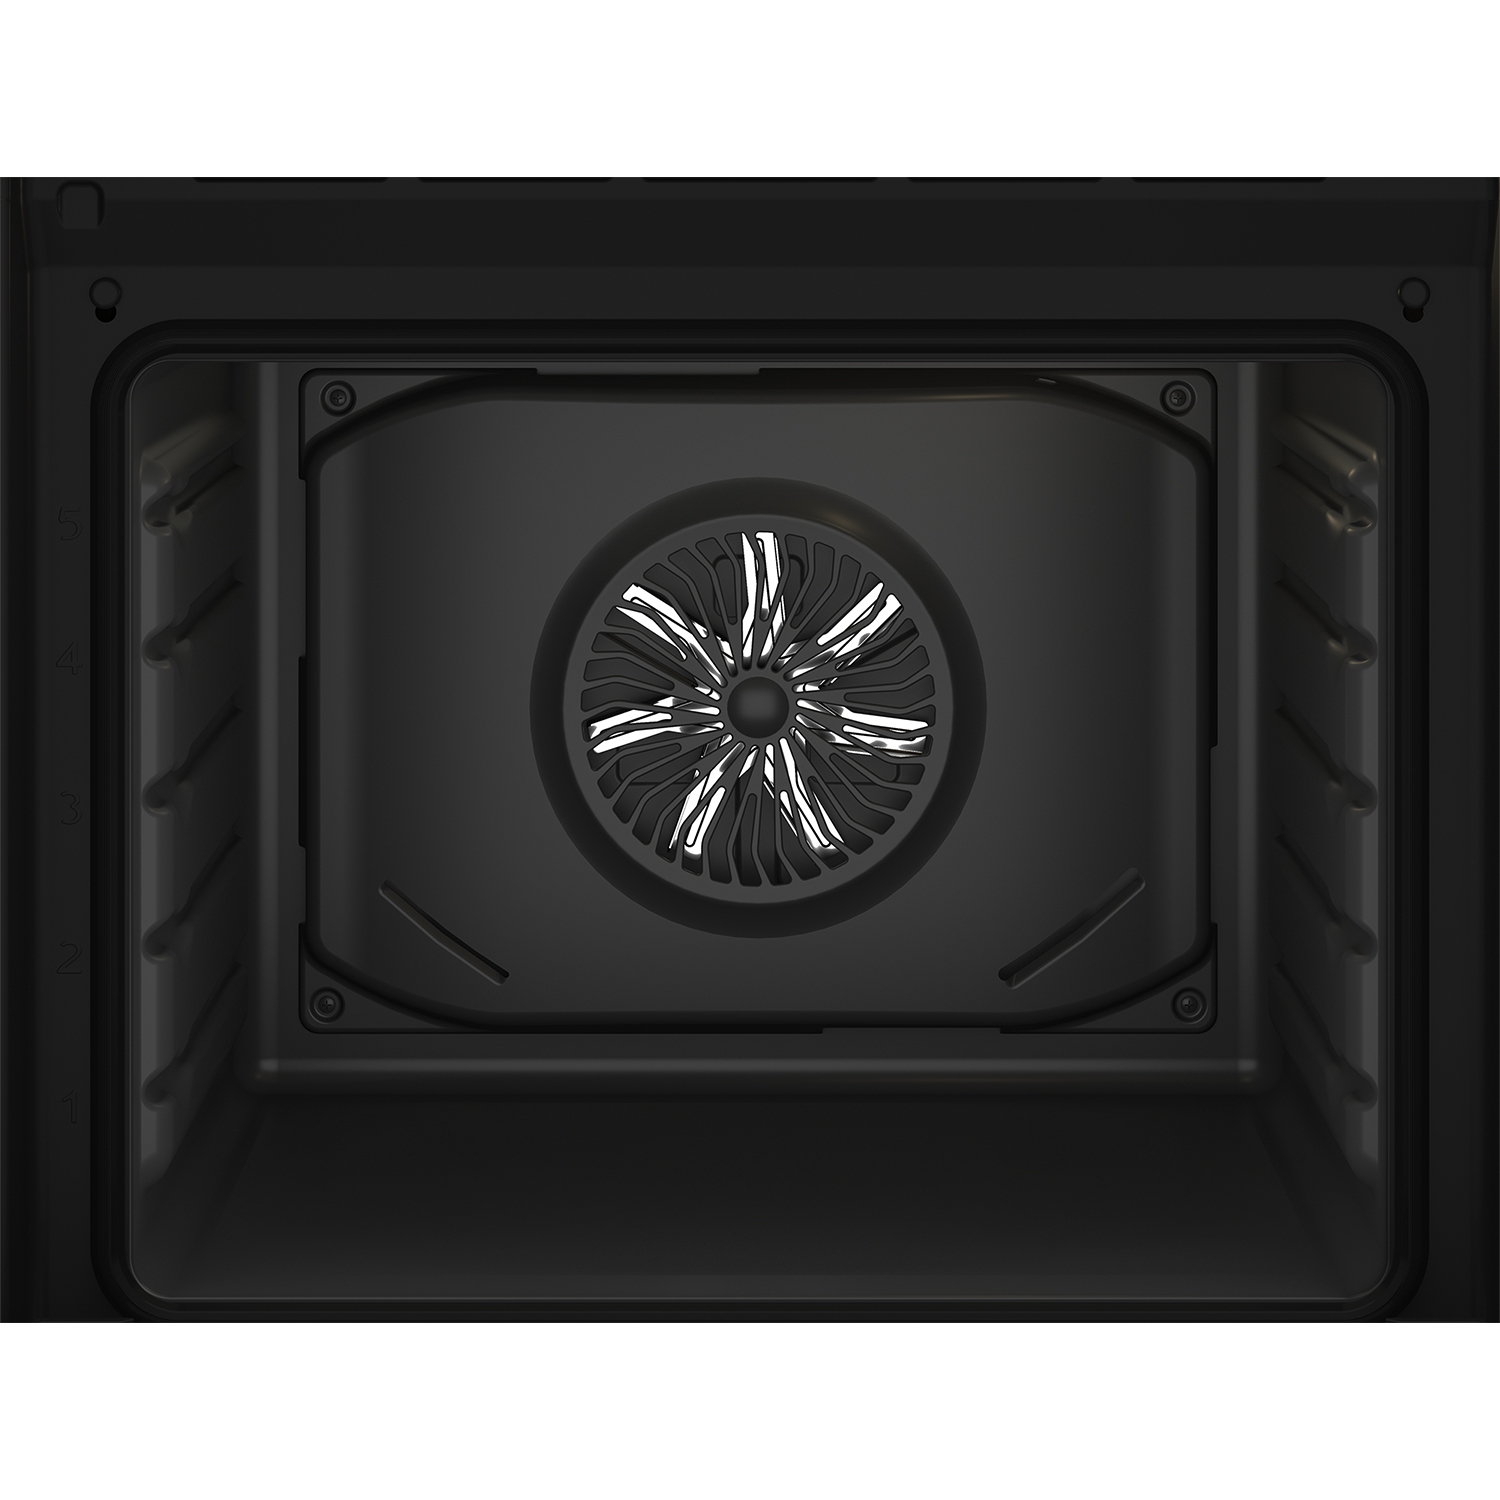 Beko AeroPerfect&trade; CIFY81X 60cm Built in RecycledNet&trade; Single Fan Oven - Stainless Steel - 1